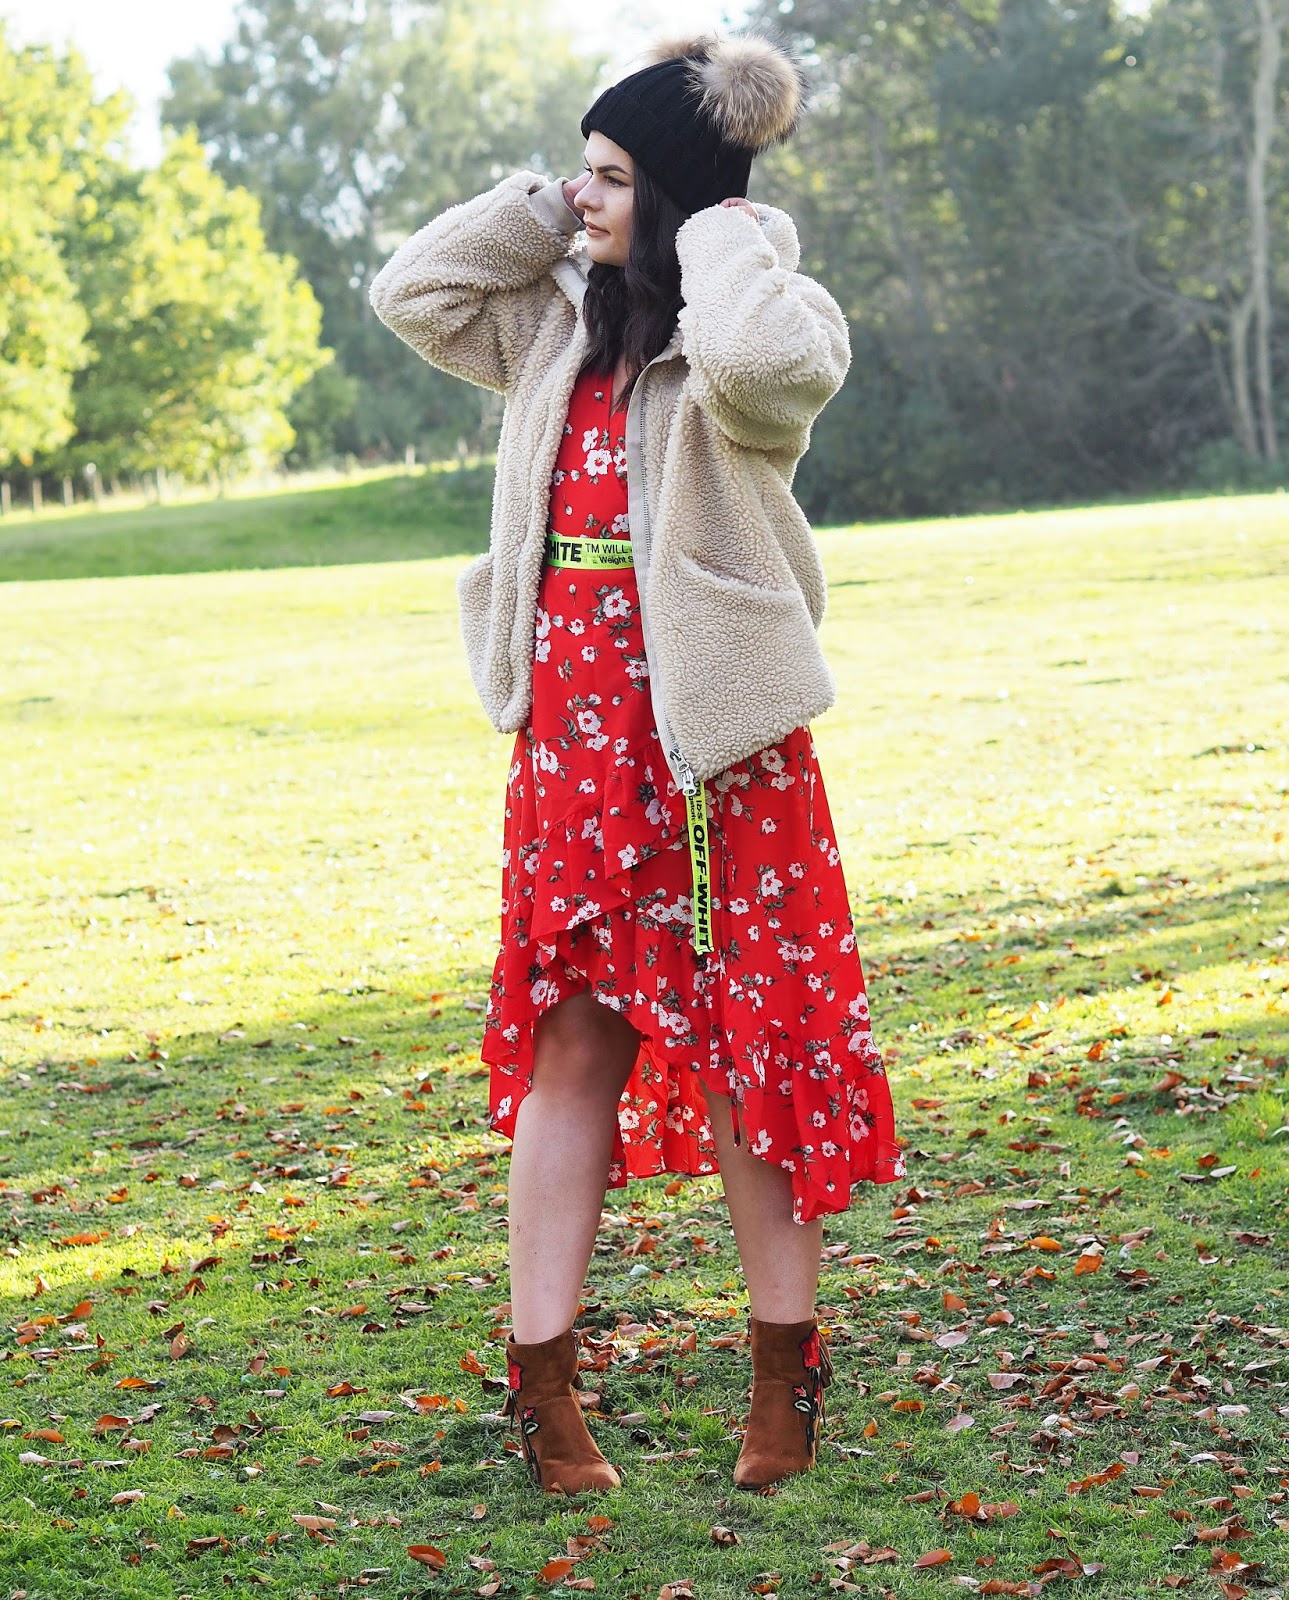 nasty gal floral dress, boohoo suede boots, autumn style, fall fashion 2017, tea dress 2017, how to style a tea dress, how to style a dress in the autumn, shearing h&m coat, sold out h&m coat, h&m teddy bear coat